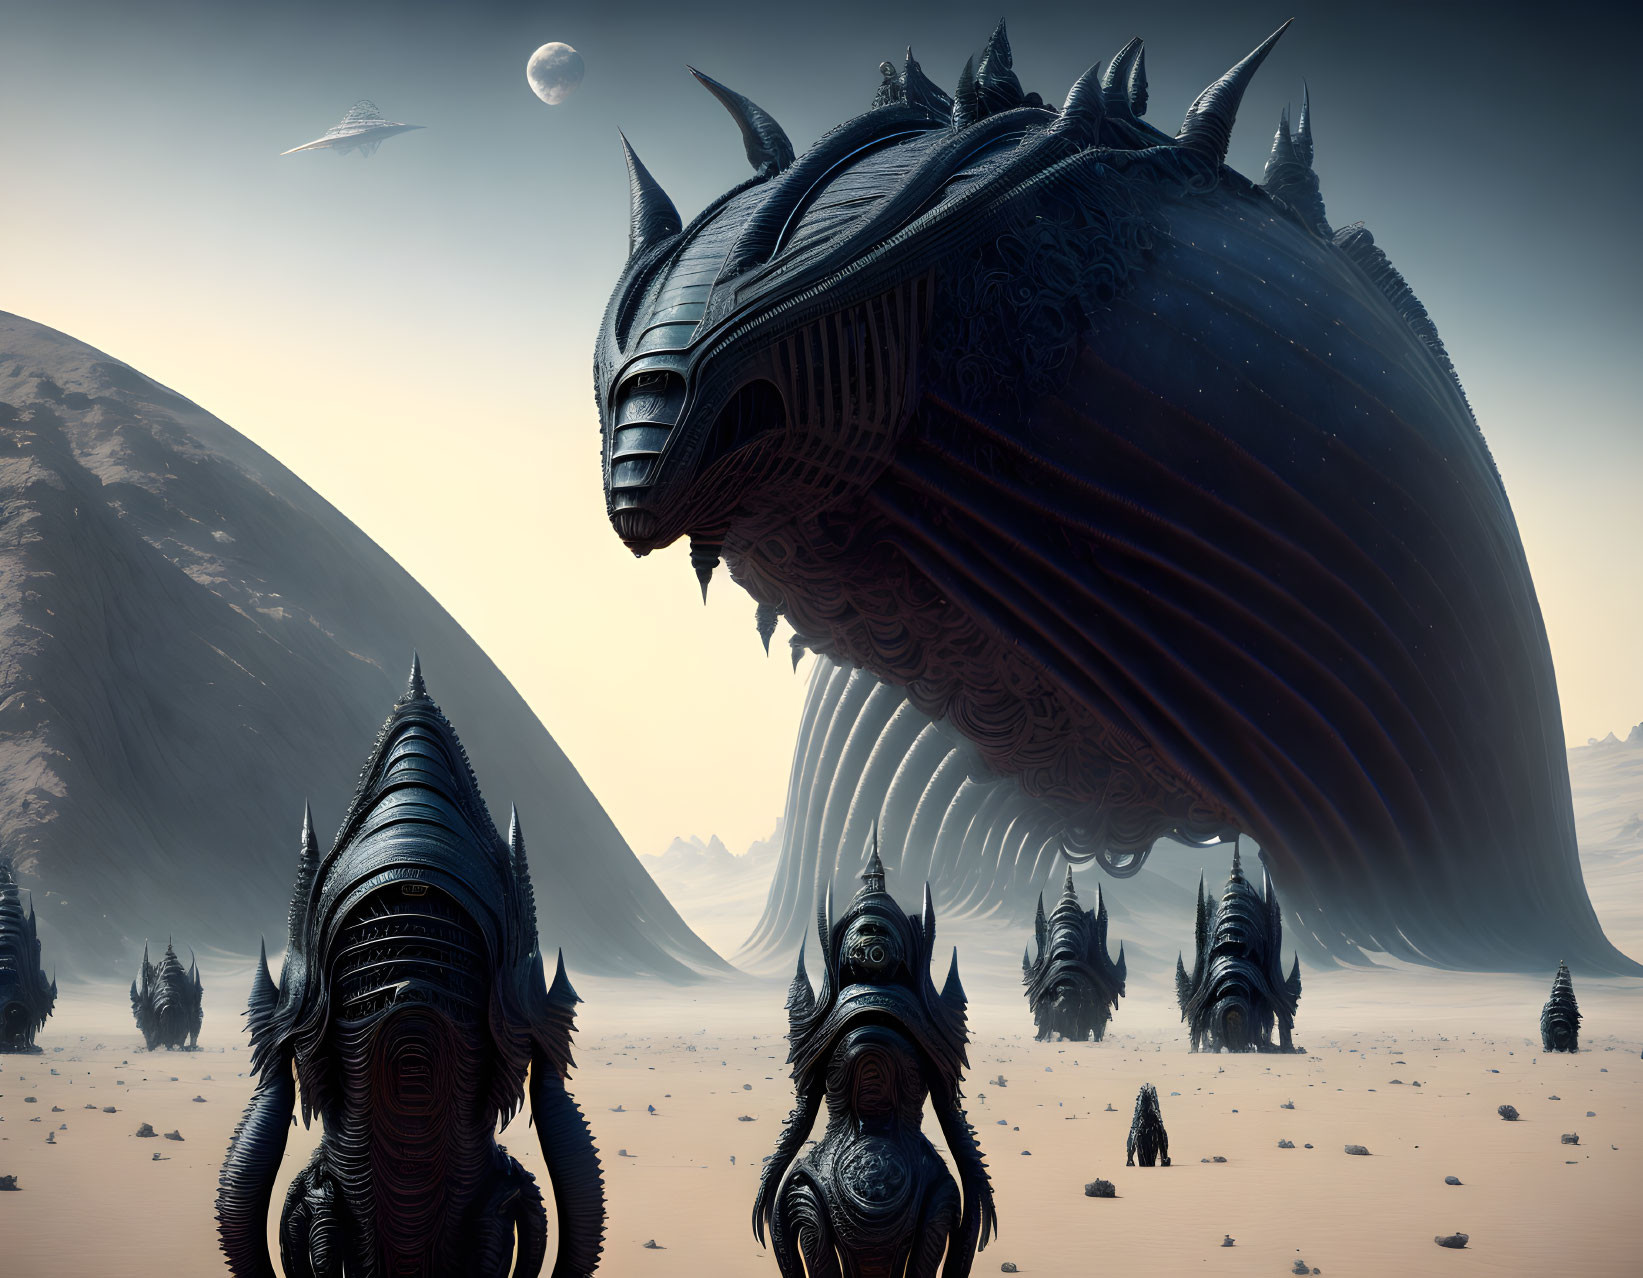   HR Giger monsters on an unknown alien world